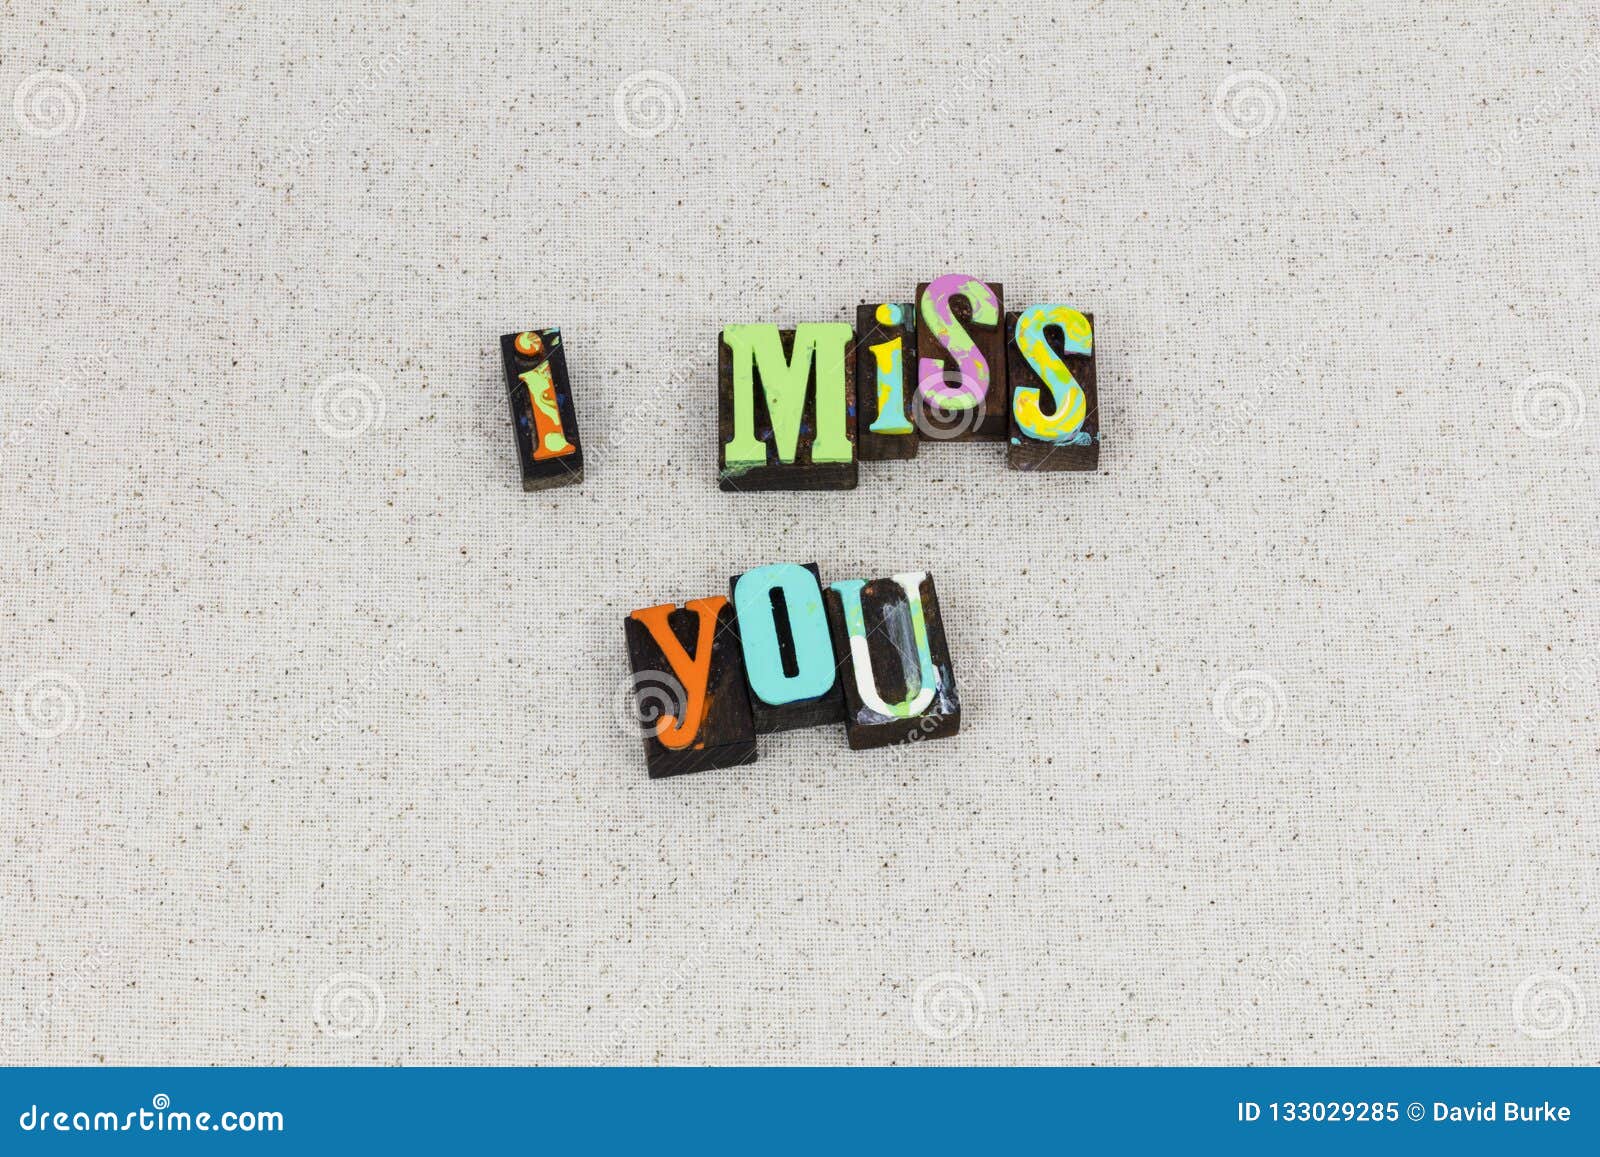 Miss You Love Romance Relationship Stock Image - Image of letters ...